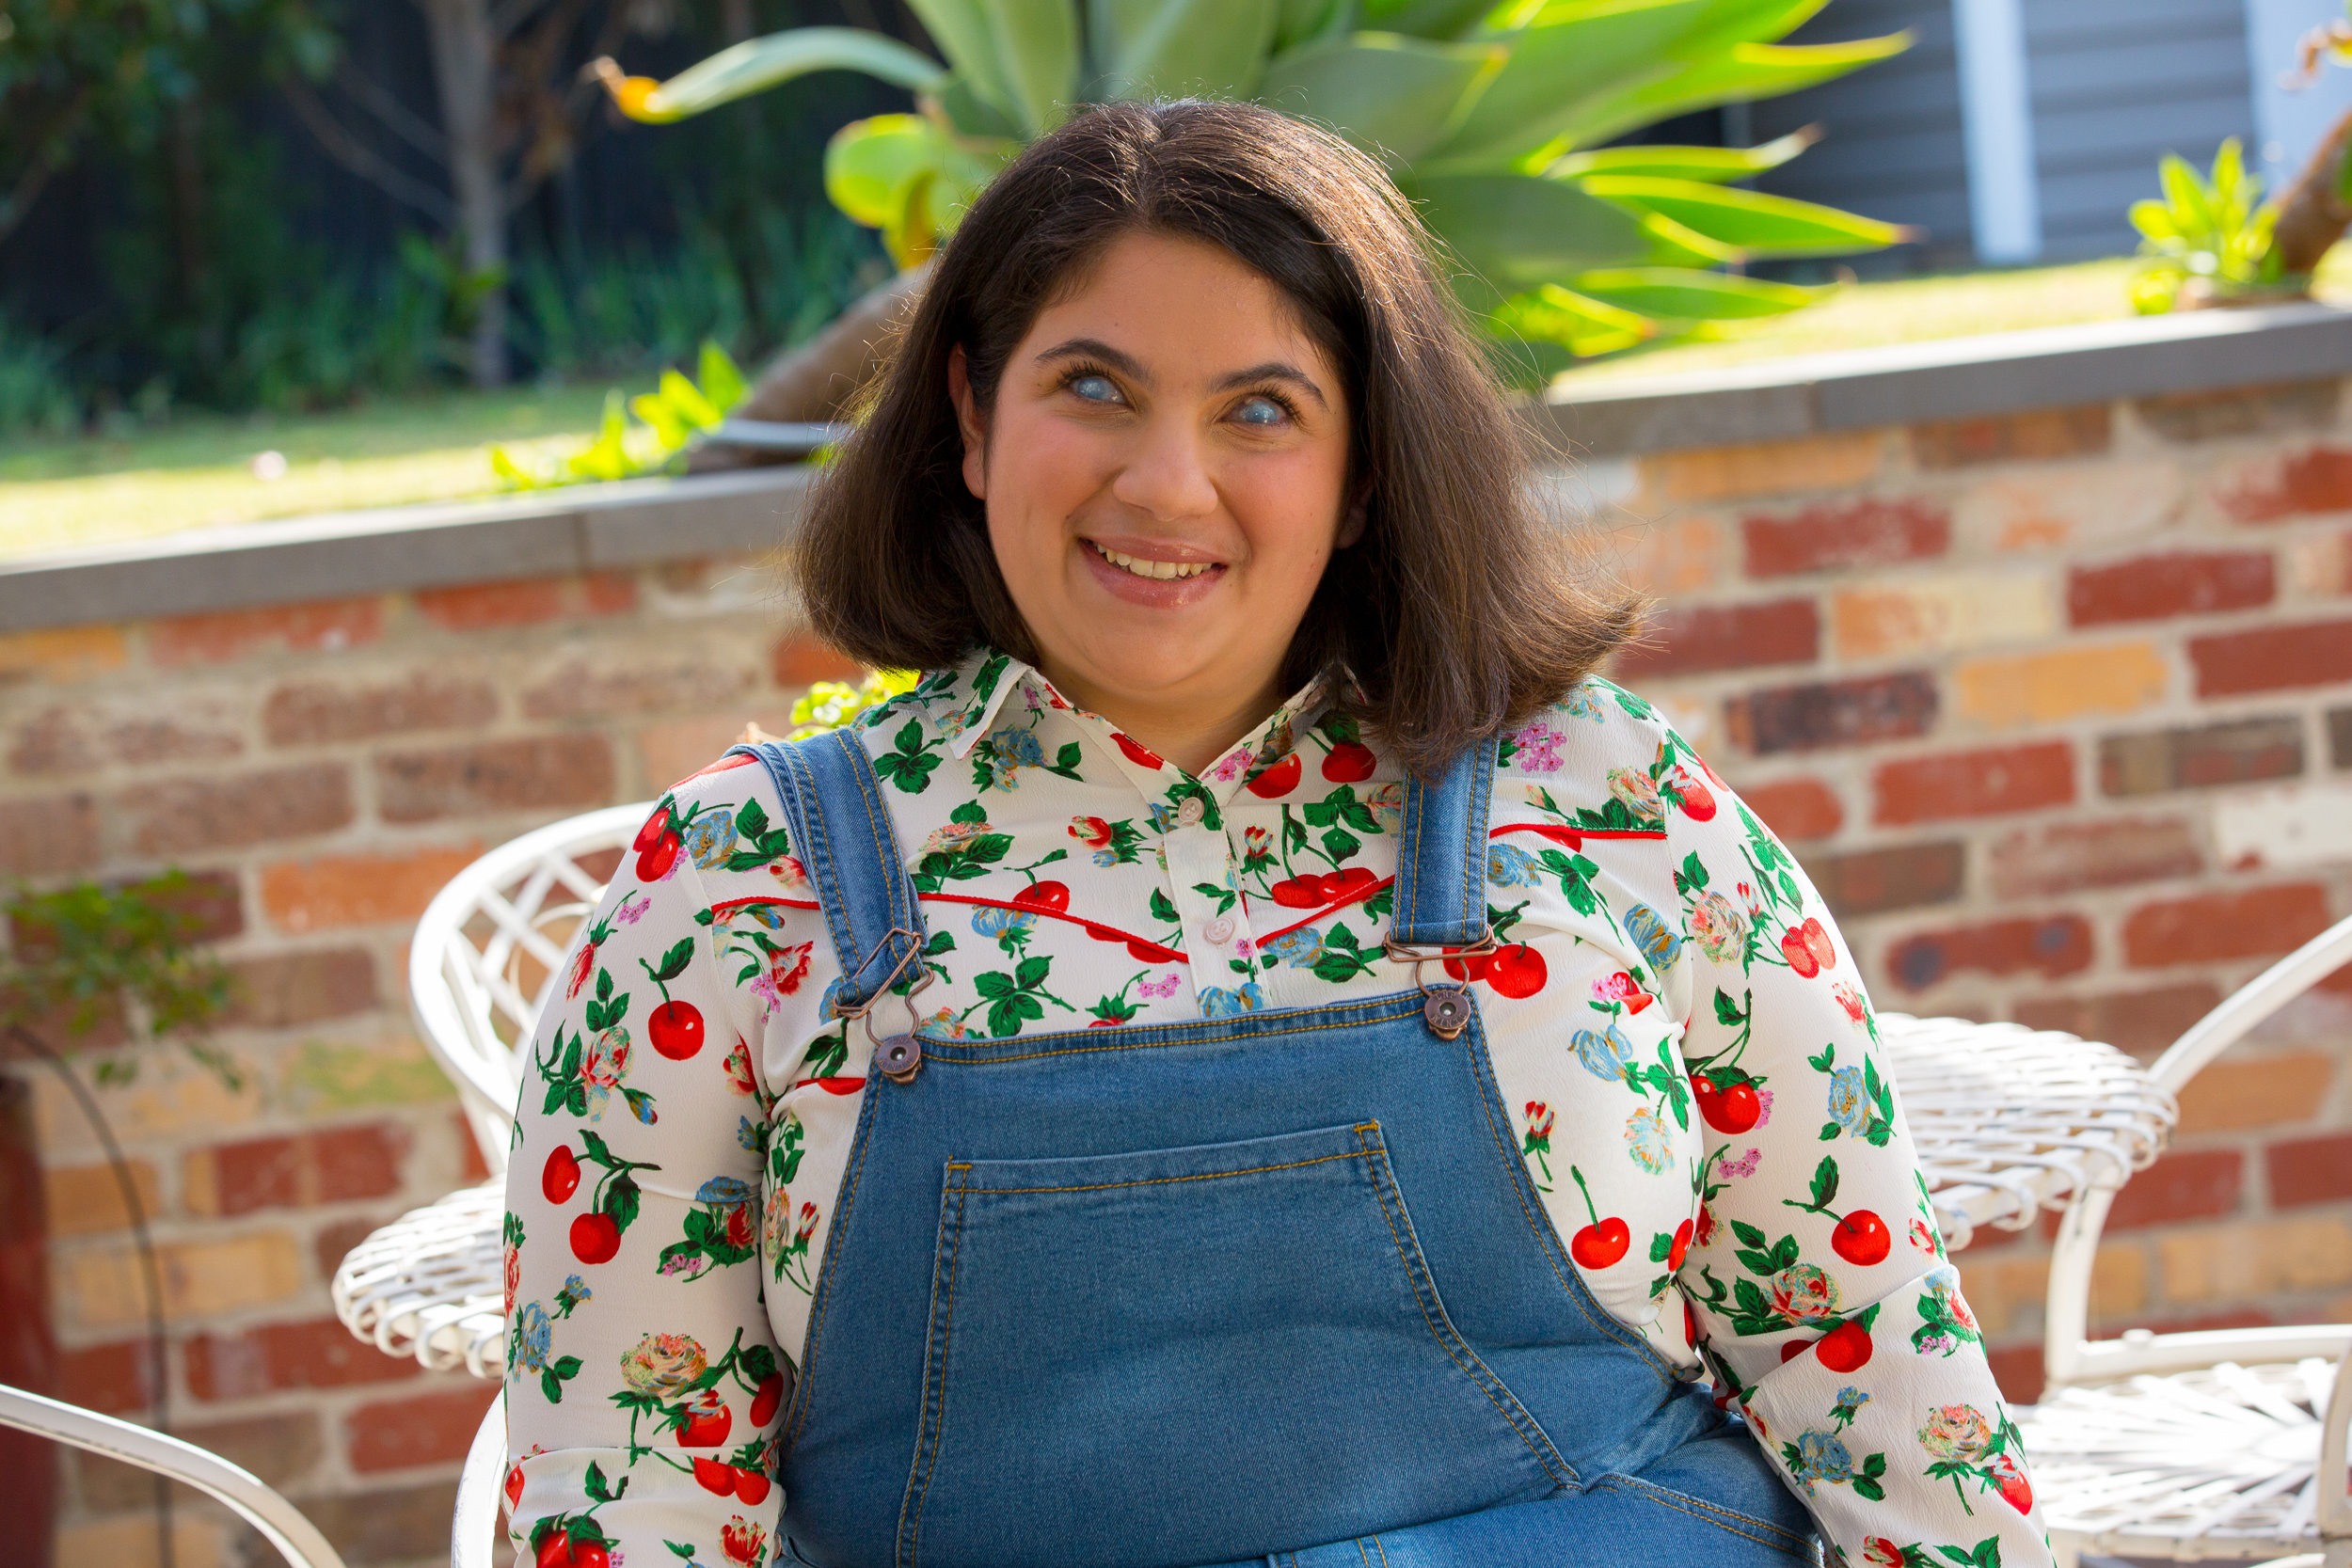 A headshot photo of Olivia who is smiling and is wearing her dark brown shoulder length hair out and parted to one side. She is wearing a white button-up shirt with a print of red cherries, green leaves and soft pink and soft blue flowers all over it. Behind her is a white outdoor furniture set and a low red brick wall with a green fern above it. Blurred into the background behind the fern is a garden with green grass.